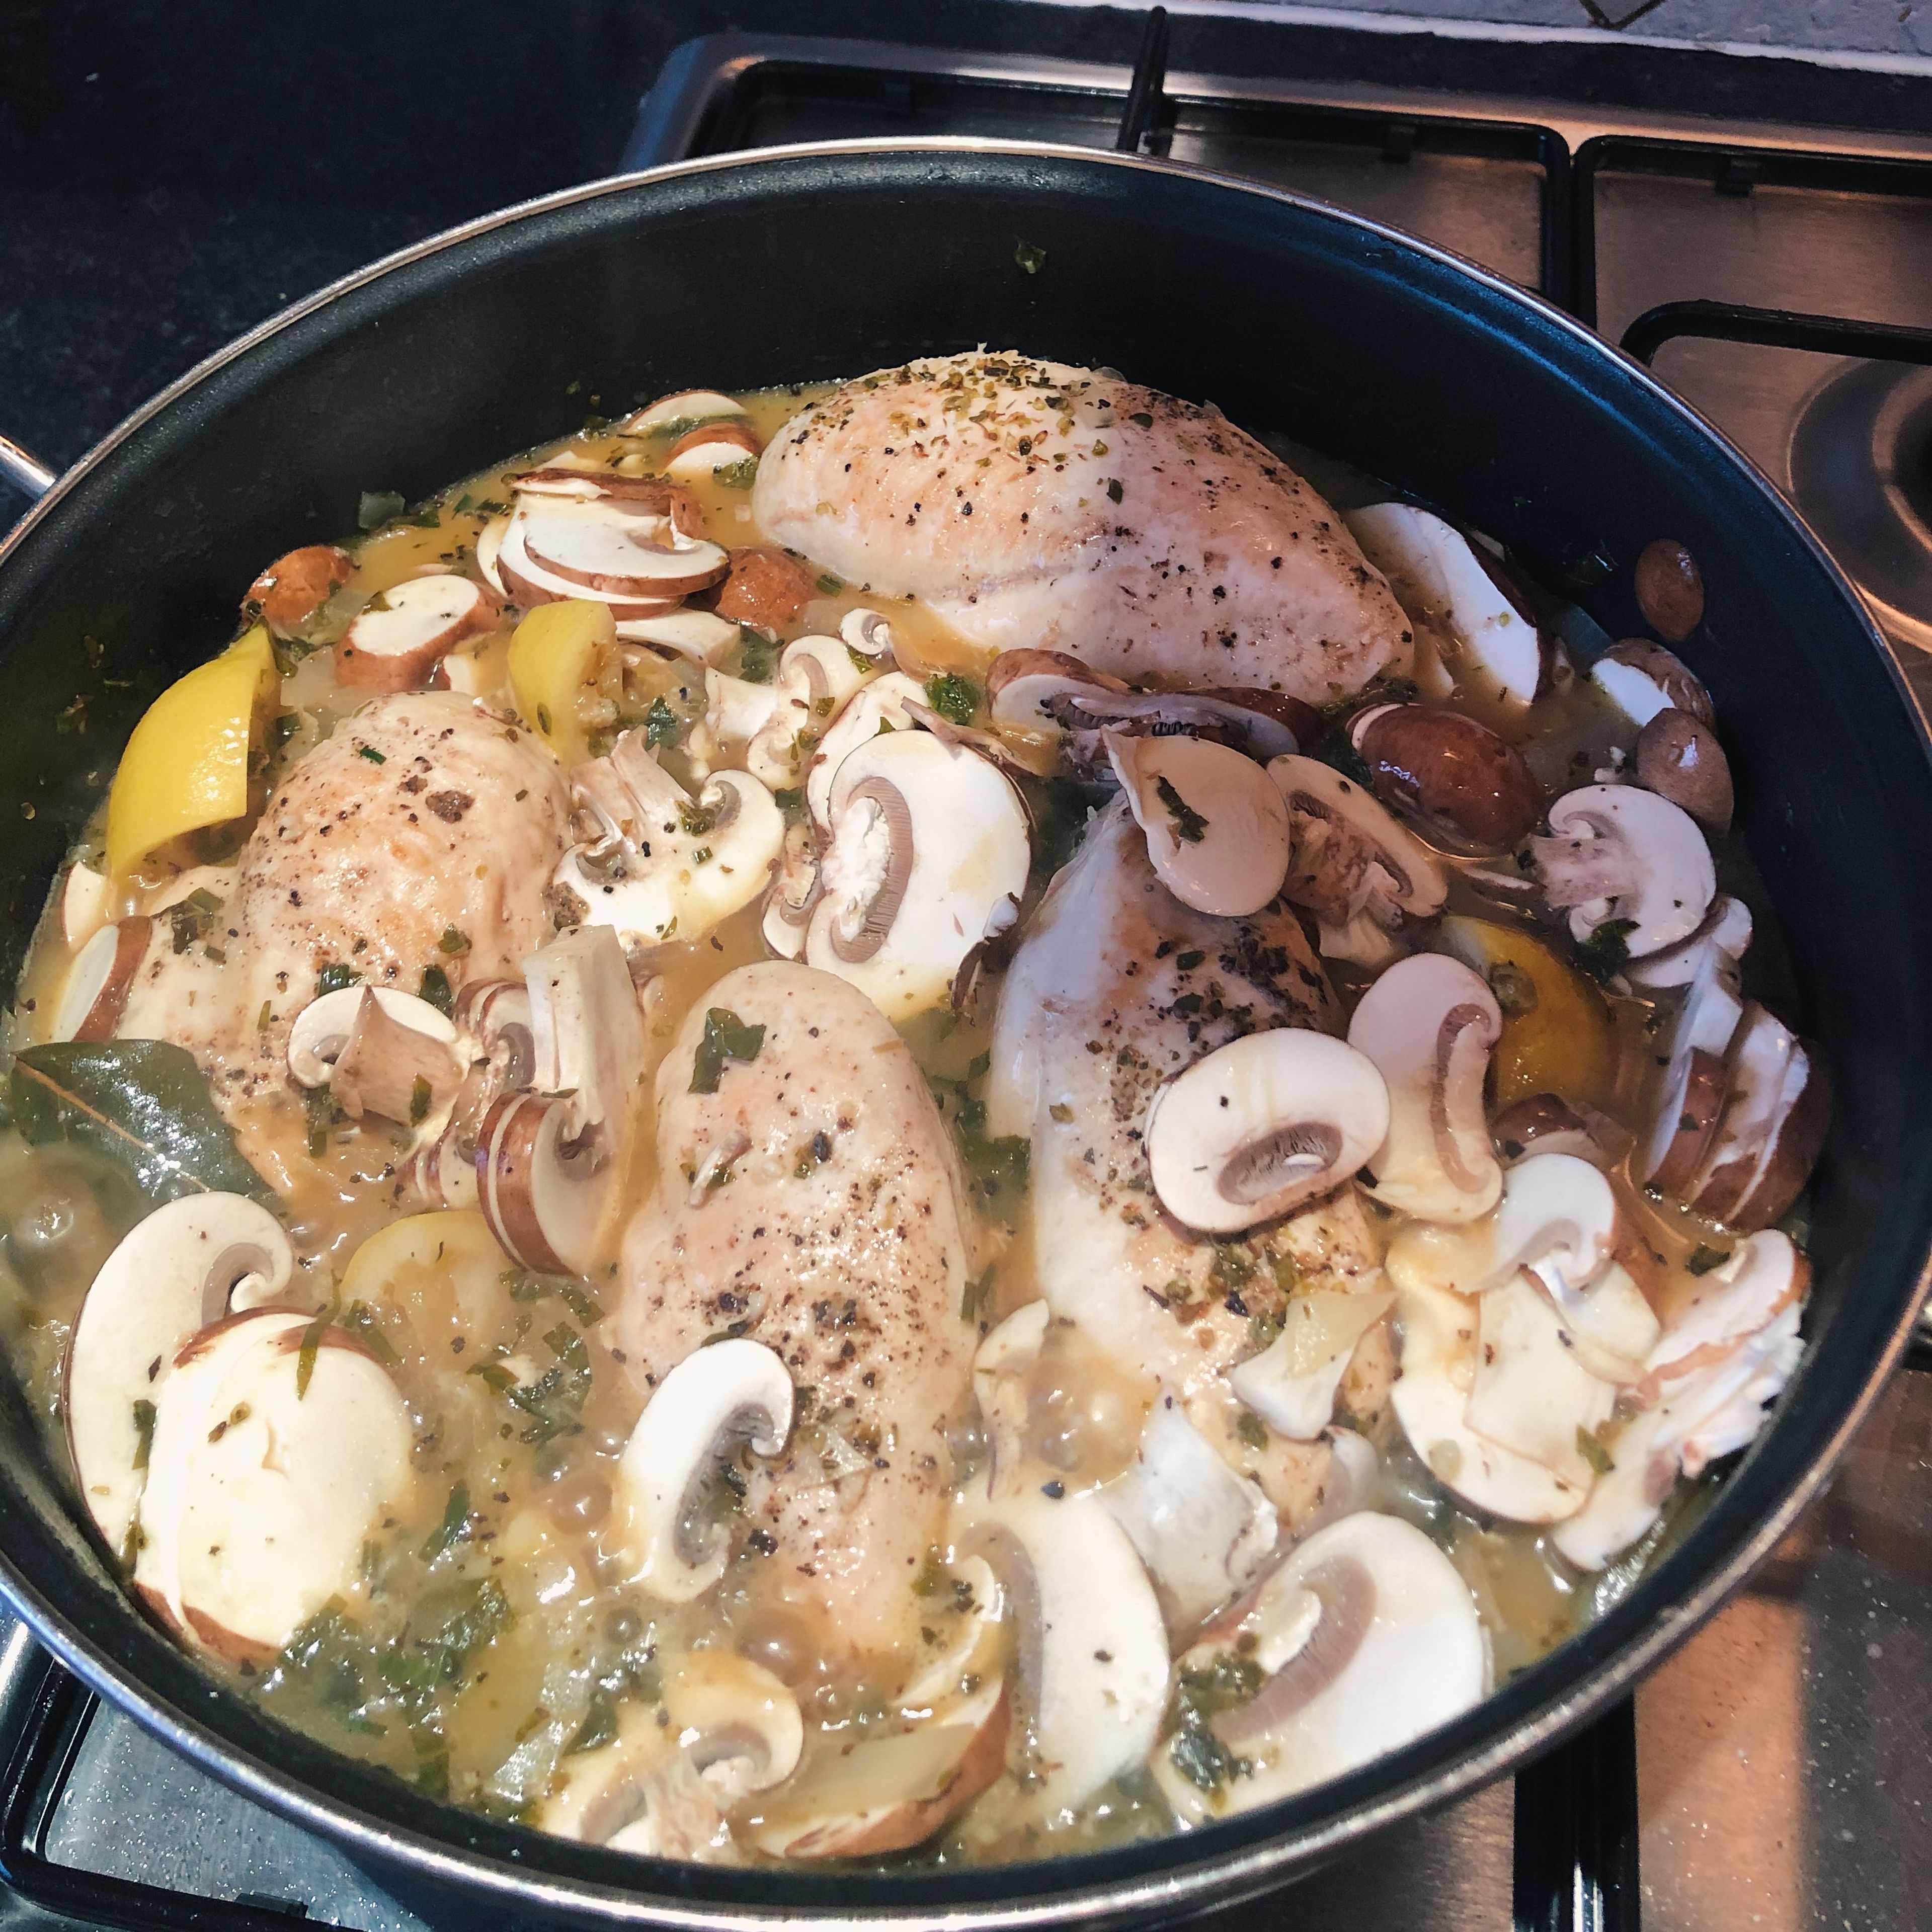 Slice mushrooms and roughly chop apricots. Add to the pan with soy sauce and Worcester sauce. Simmer with lid on for 15-20 minutes, stirring and flipping chicken occasionally.